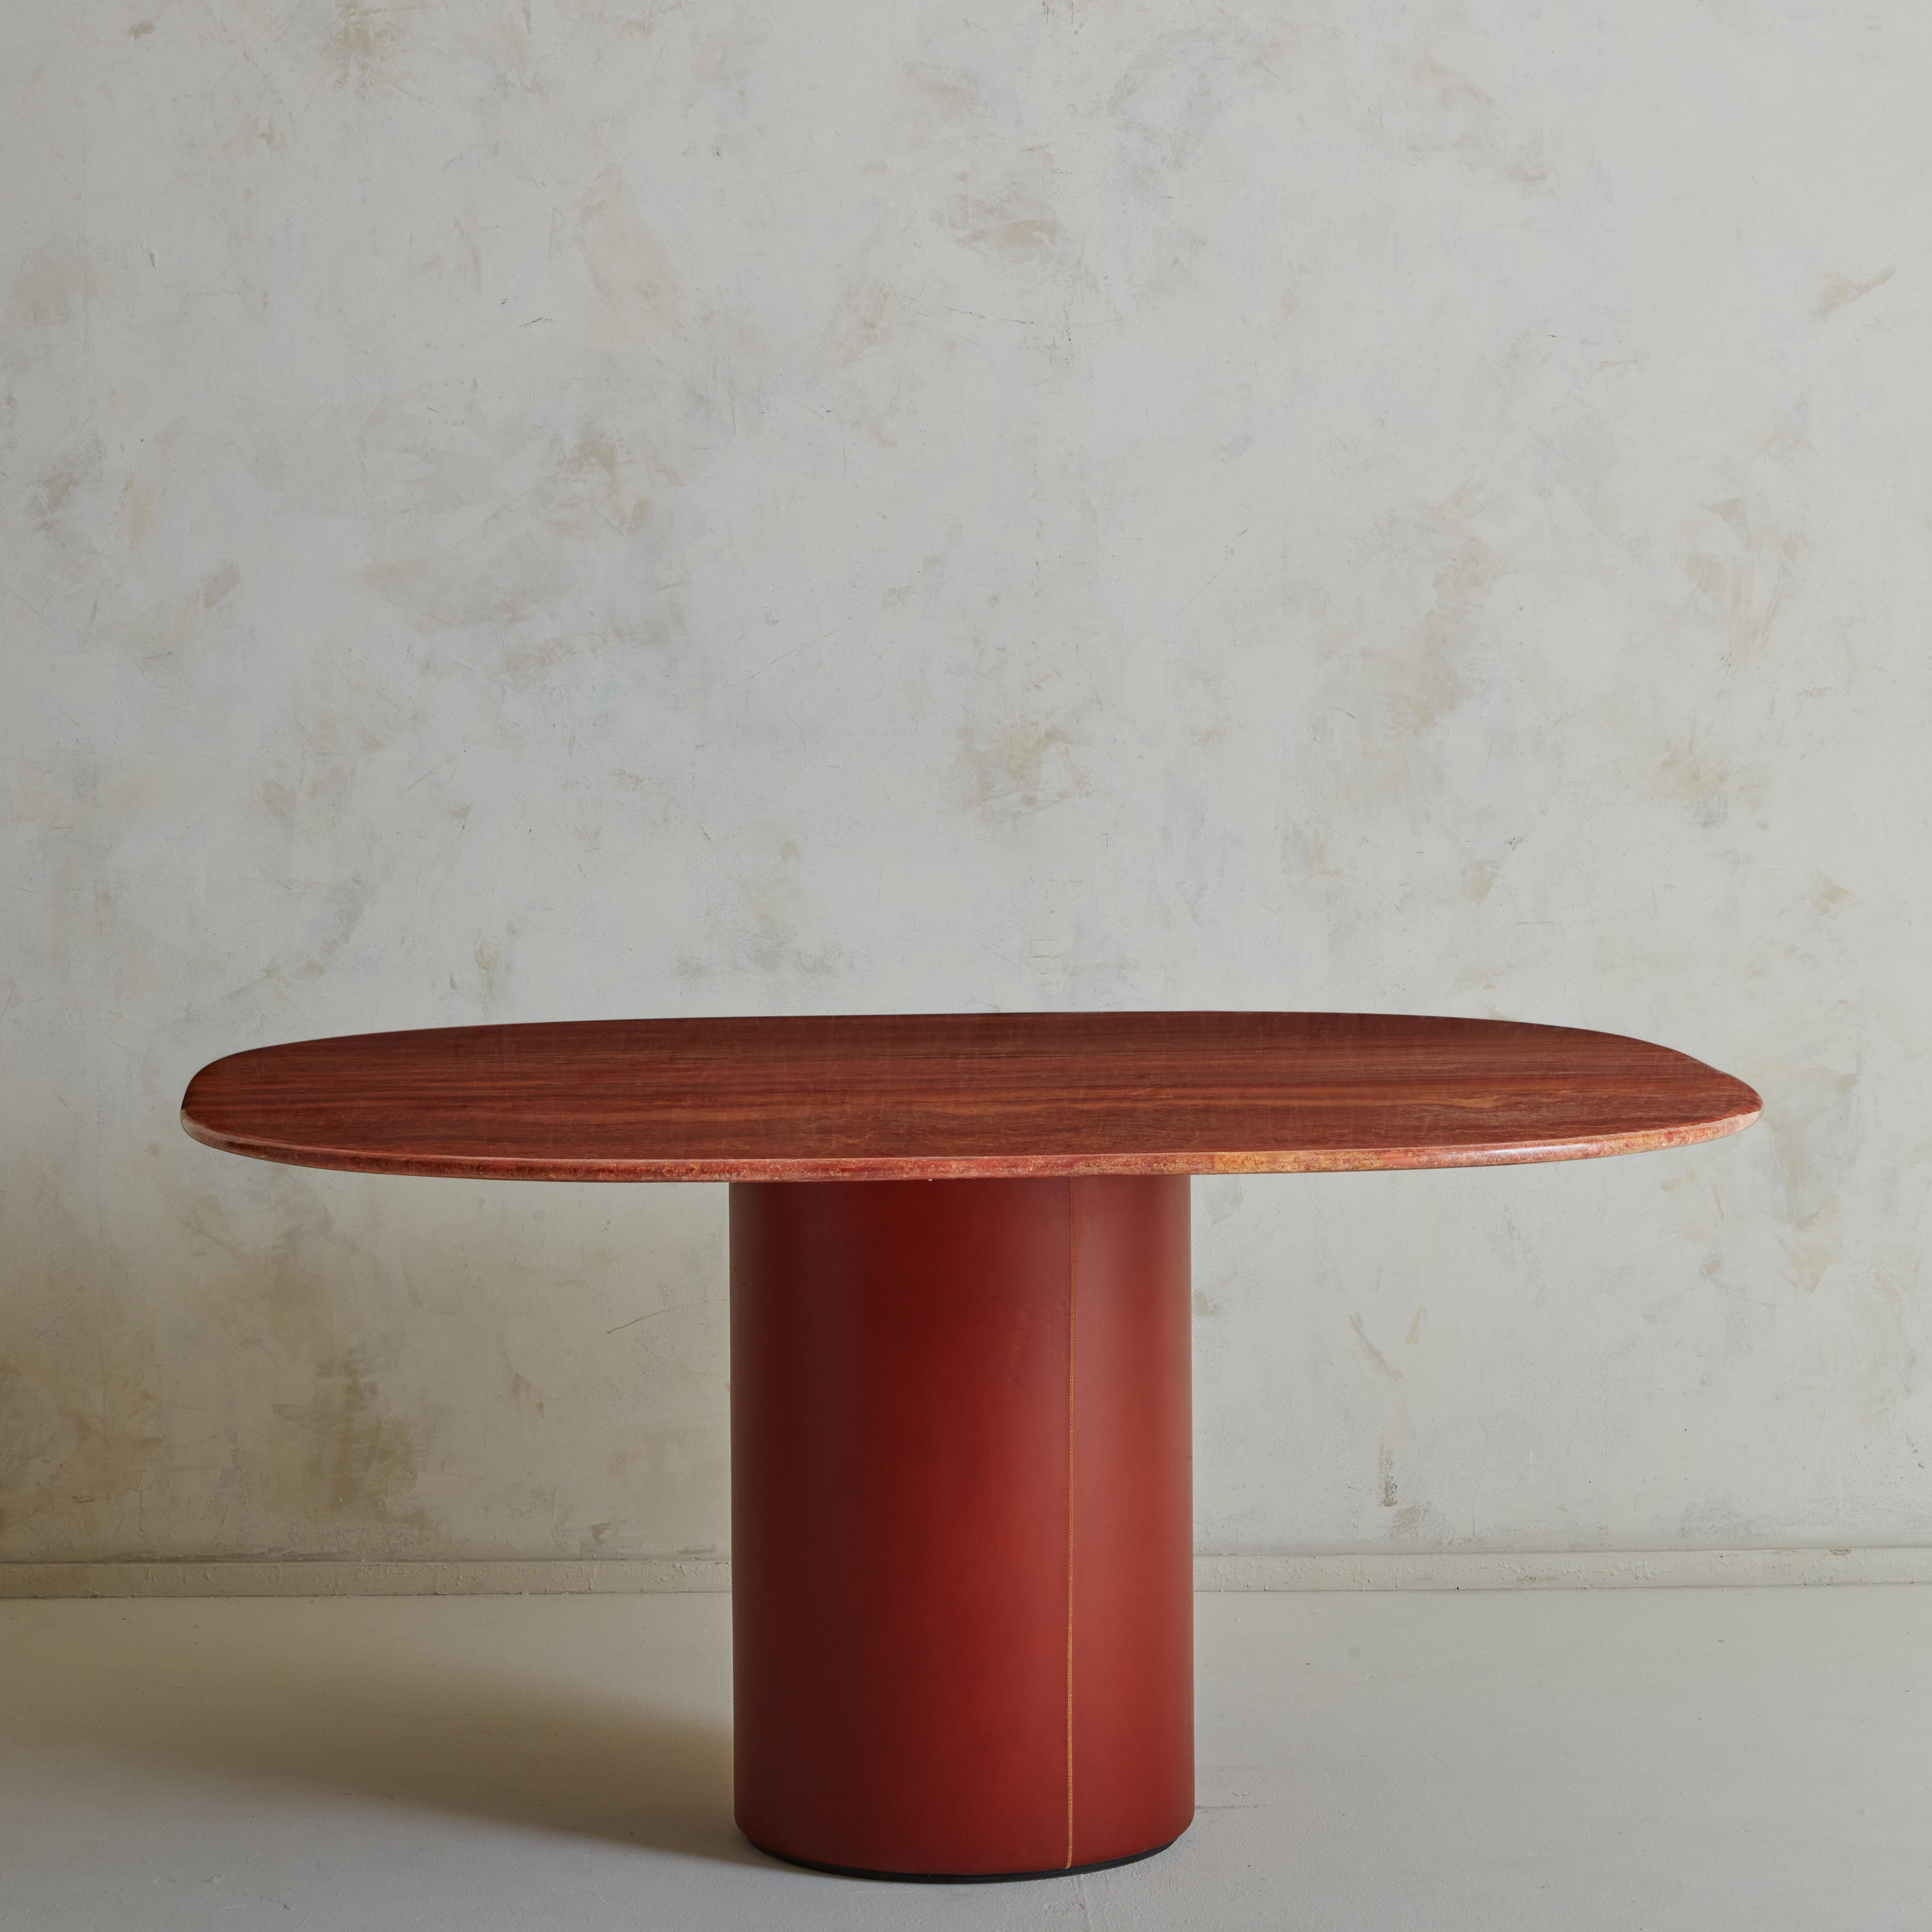 A highly elegant ‘Tobio’ dining table by designers Afra e Tobia Scarpa and produced by B&B Italia, 1974. Featuring a leather clad base with a red Persian travertine top - a wonderful combination of timeless materials and a true heritage piece.